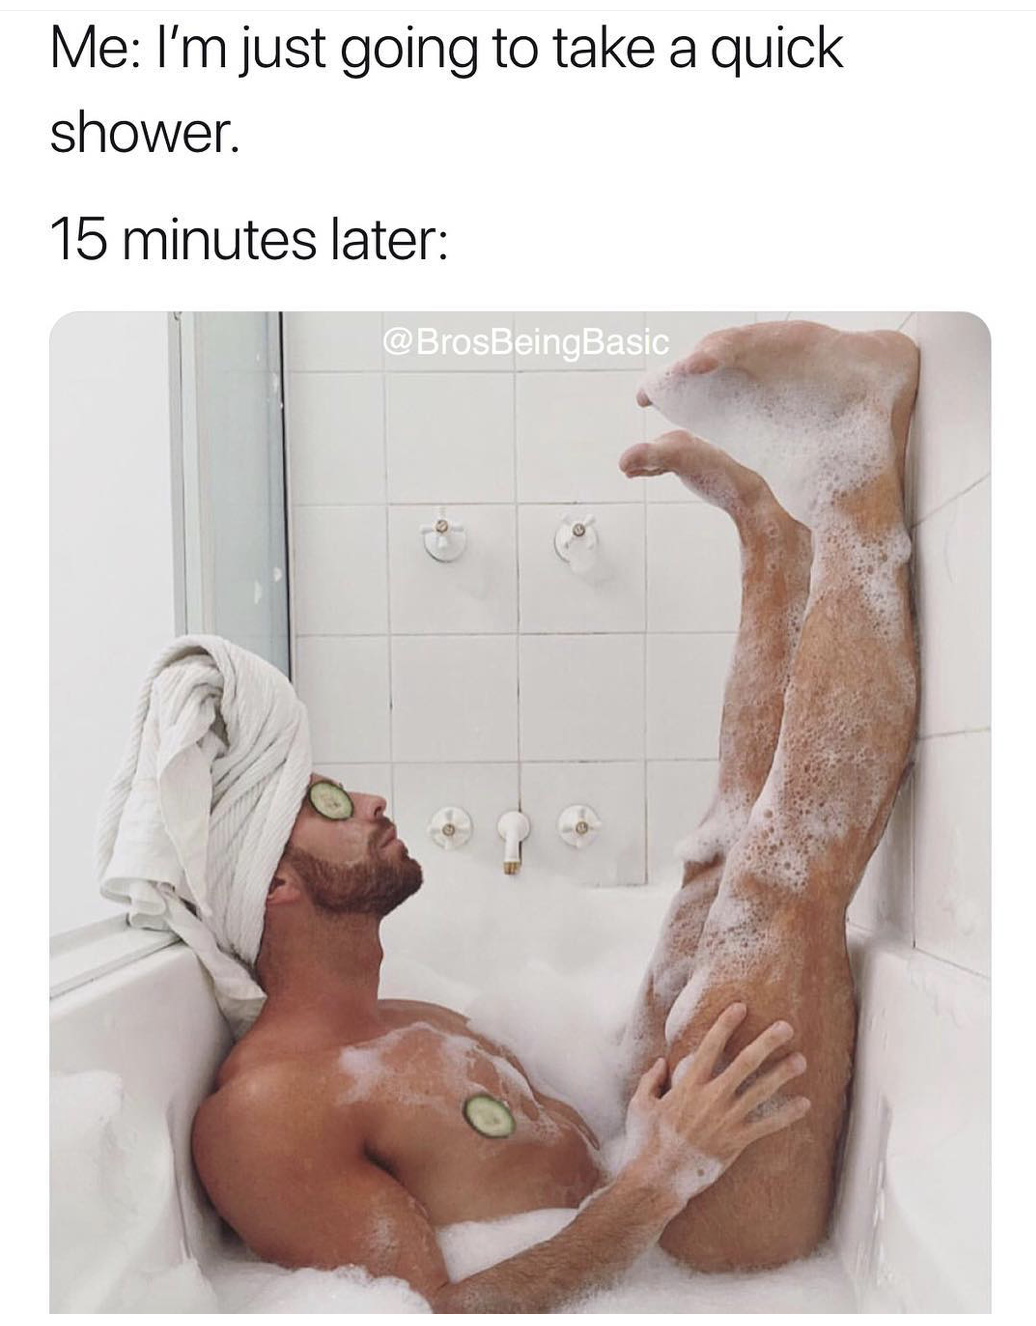 guys take photos like girls - Me I'm just going to take a quick shower. 15 minutes later BrosBeingBasic